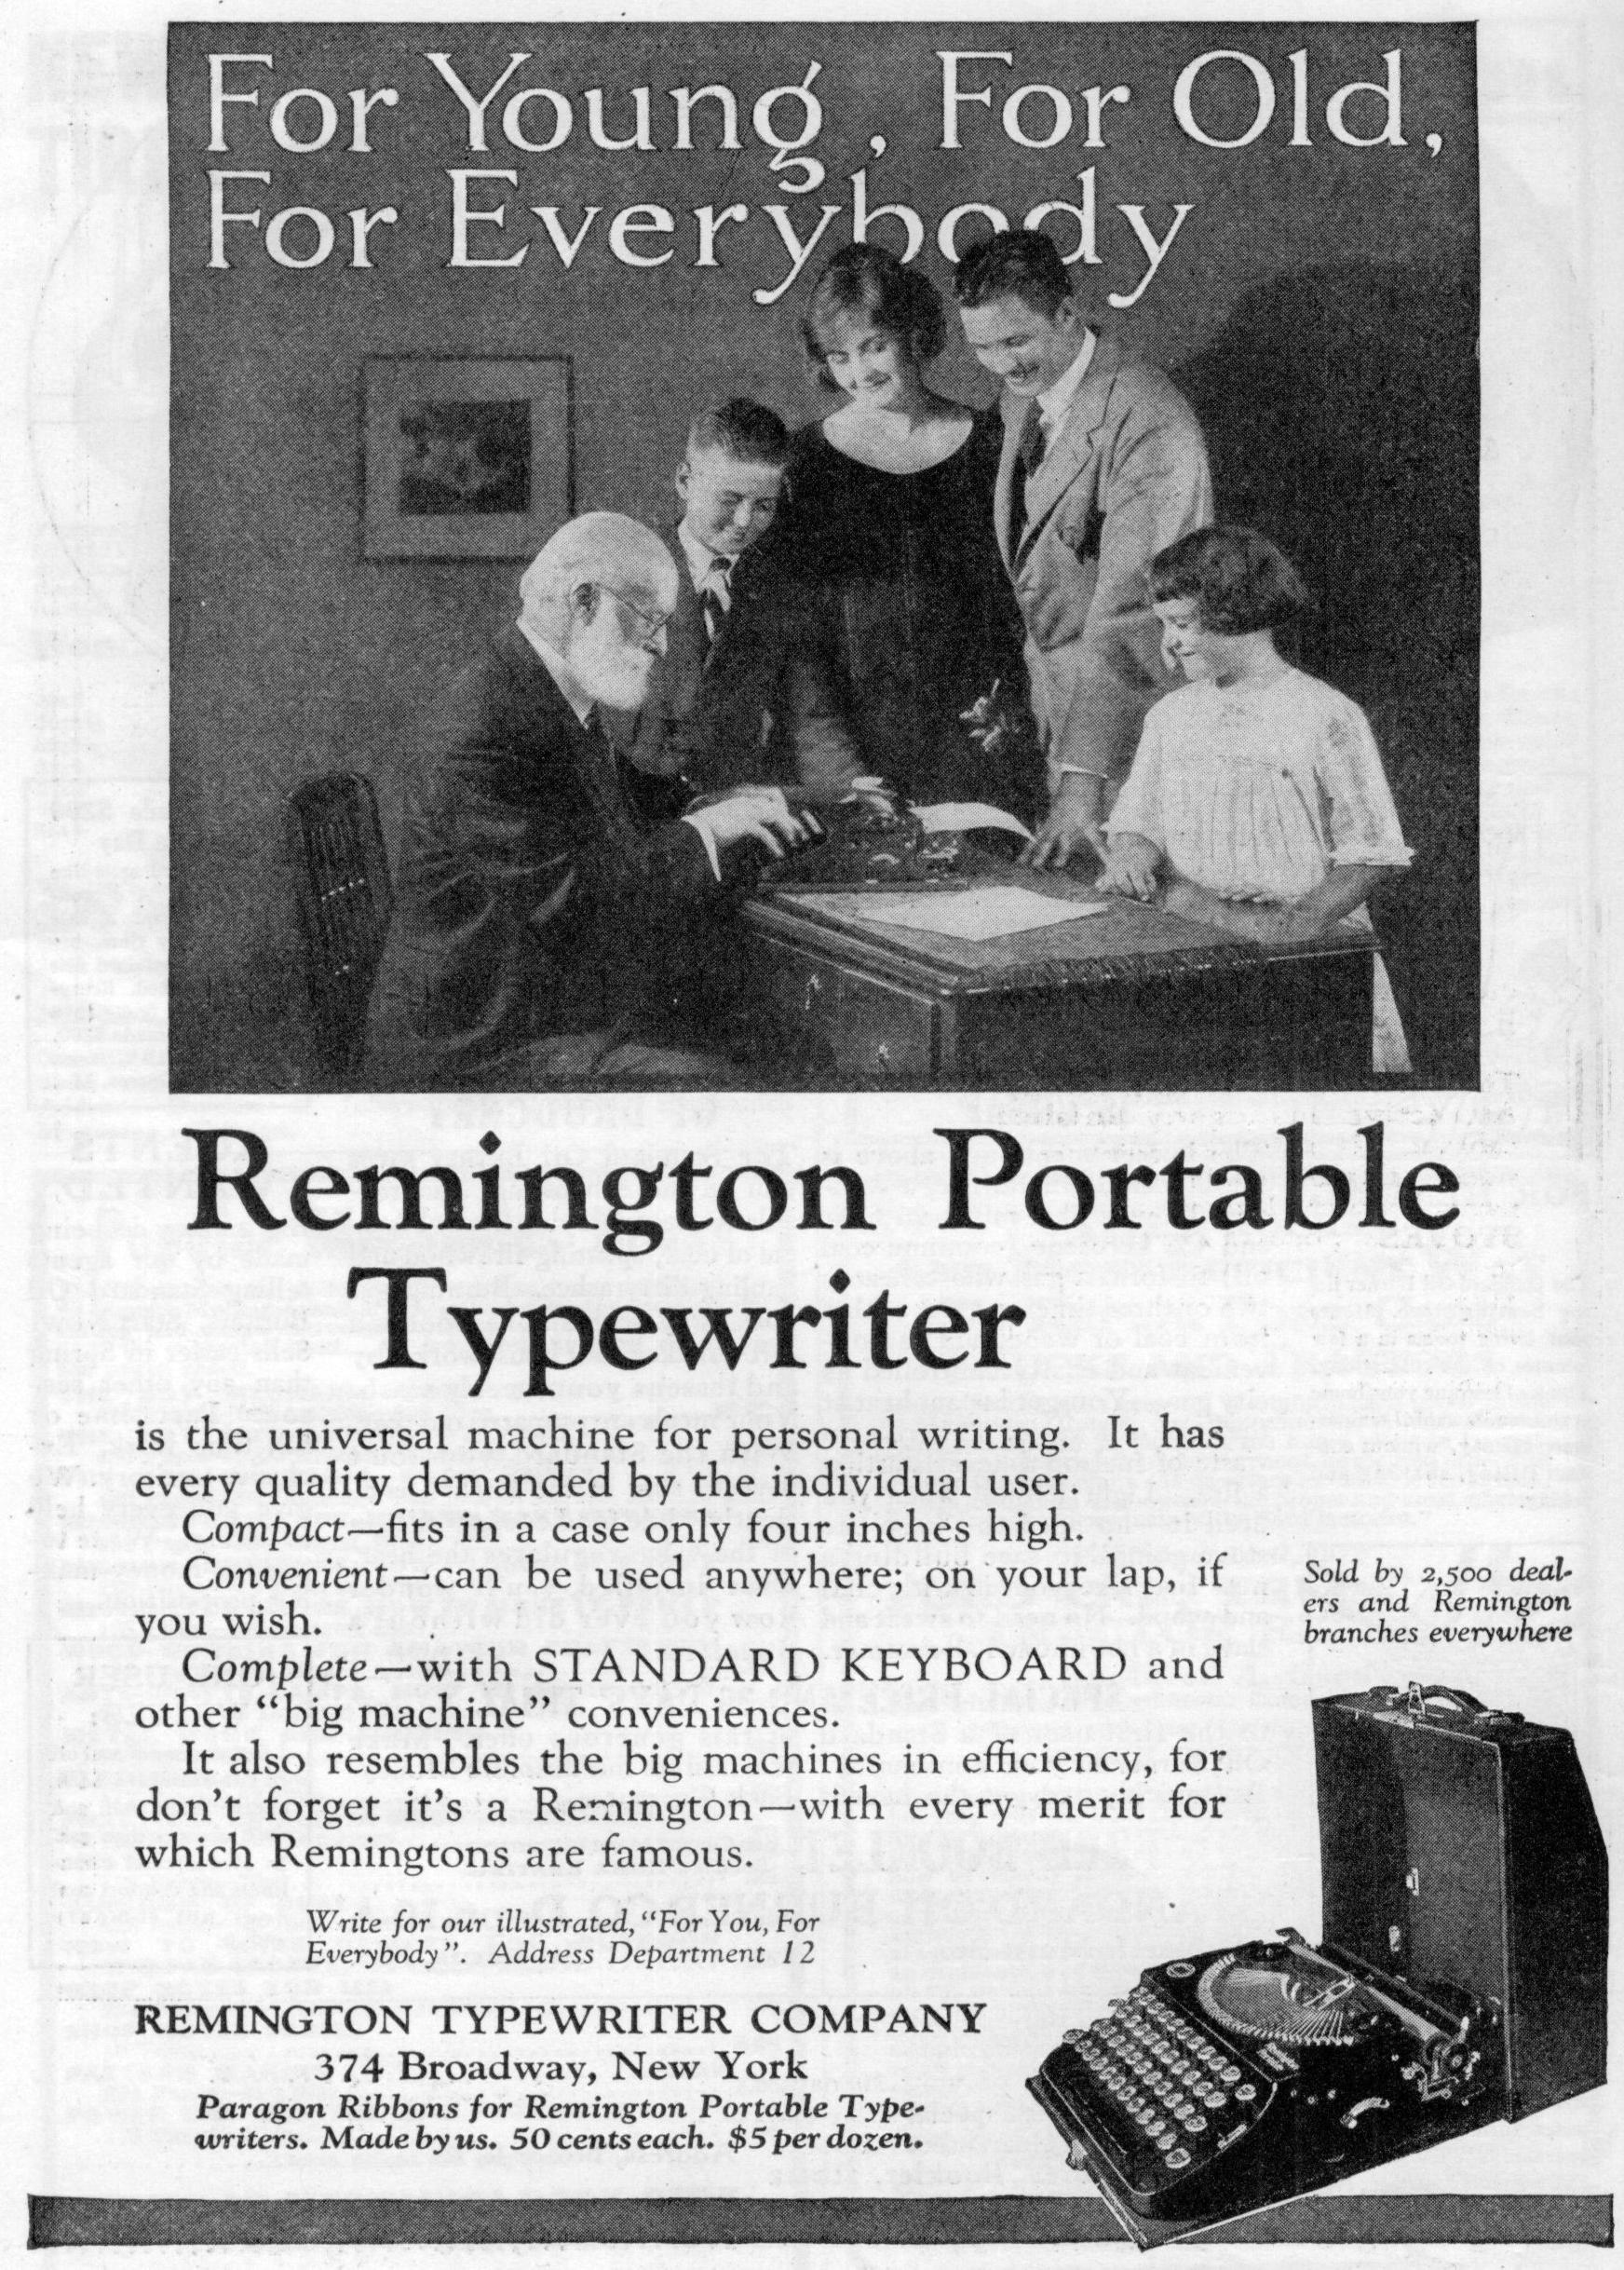 「For Young, For Old, For Everybody, Remington Portable Typewriter」の広告（『Popular Mechanics』誌1923年10月号）